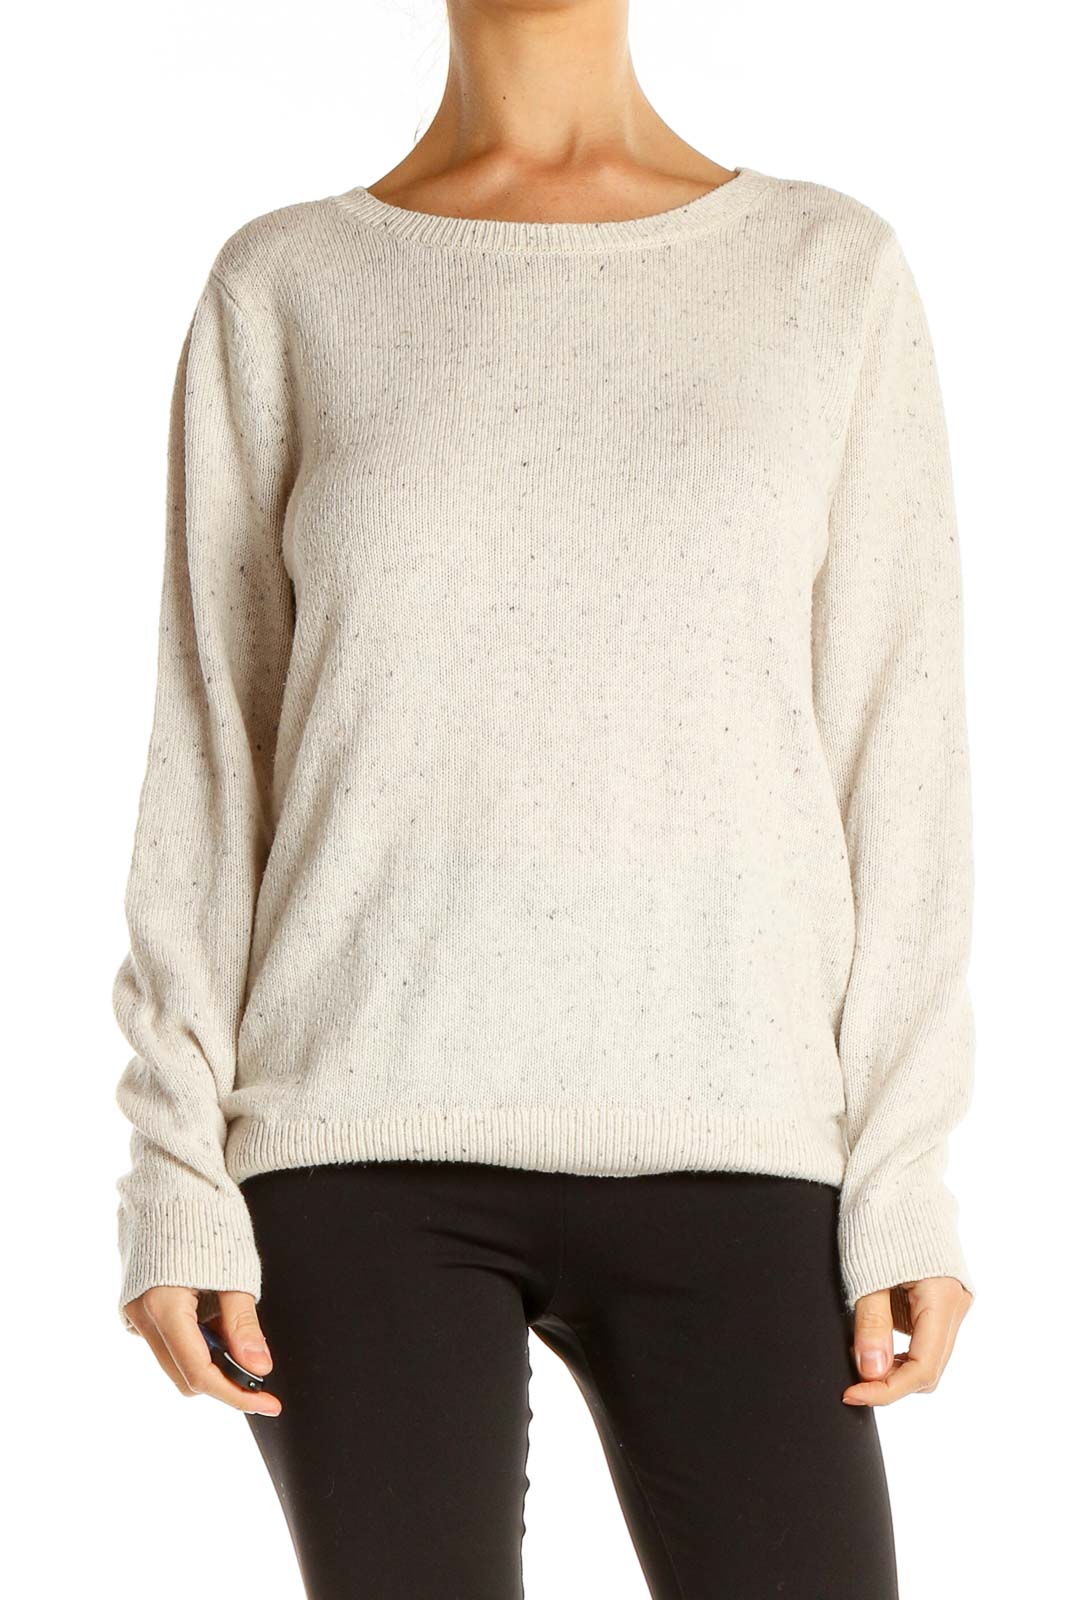 Beige Speckled All Day Wear Sweater Front